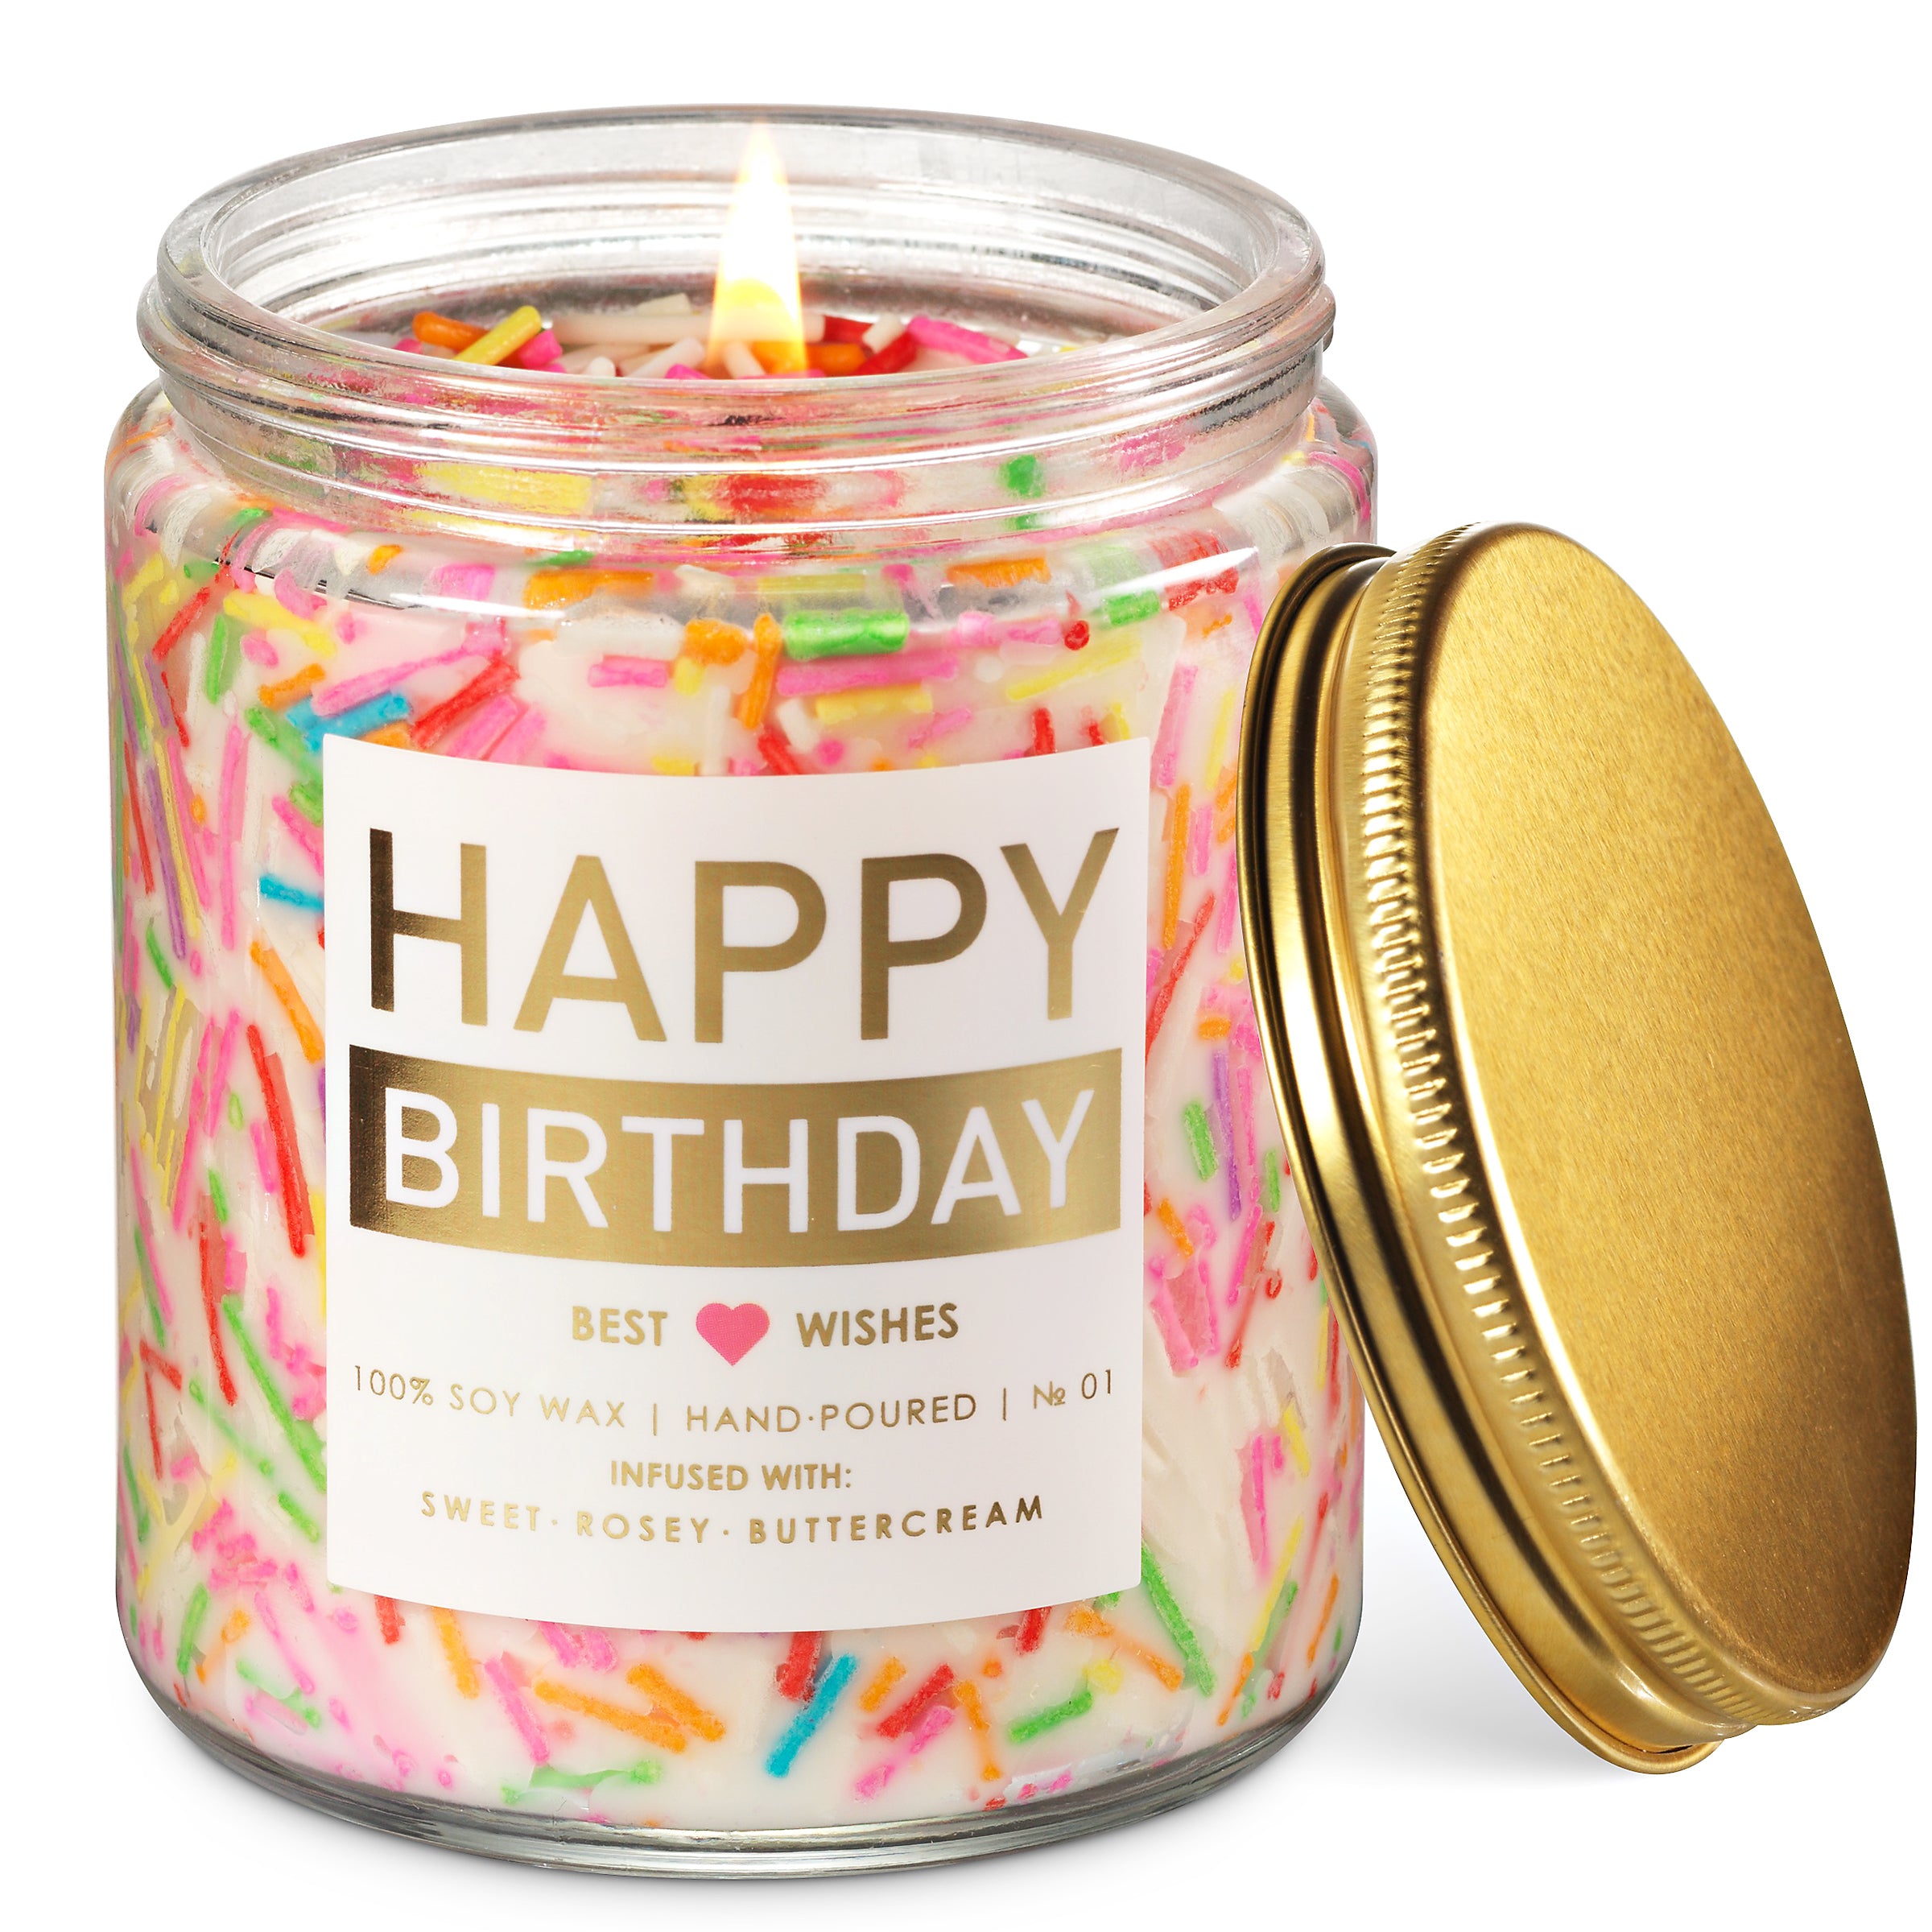 Lovery Birthday Candle Gift Set, 7oz Scented Decorated Happy Birthday Candles